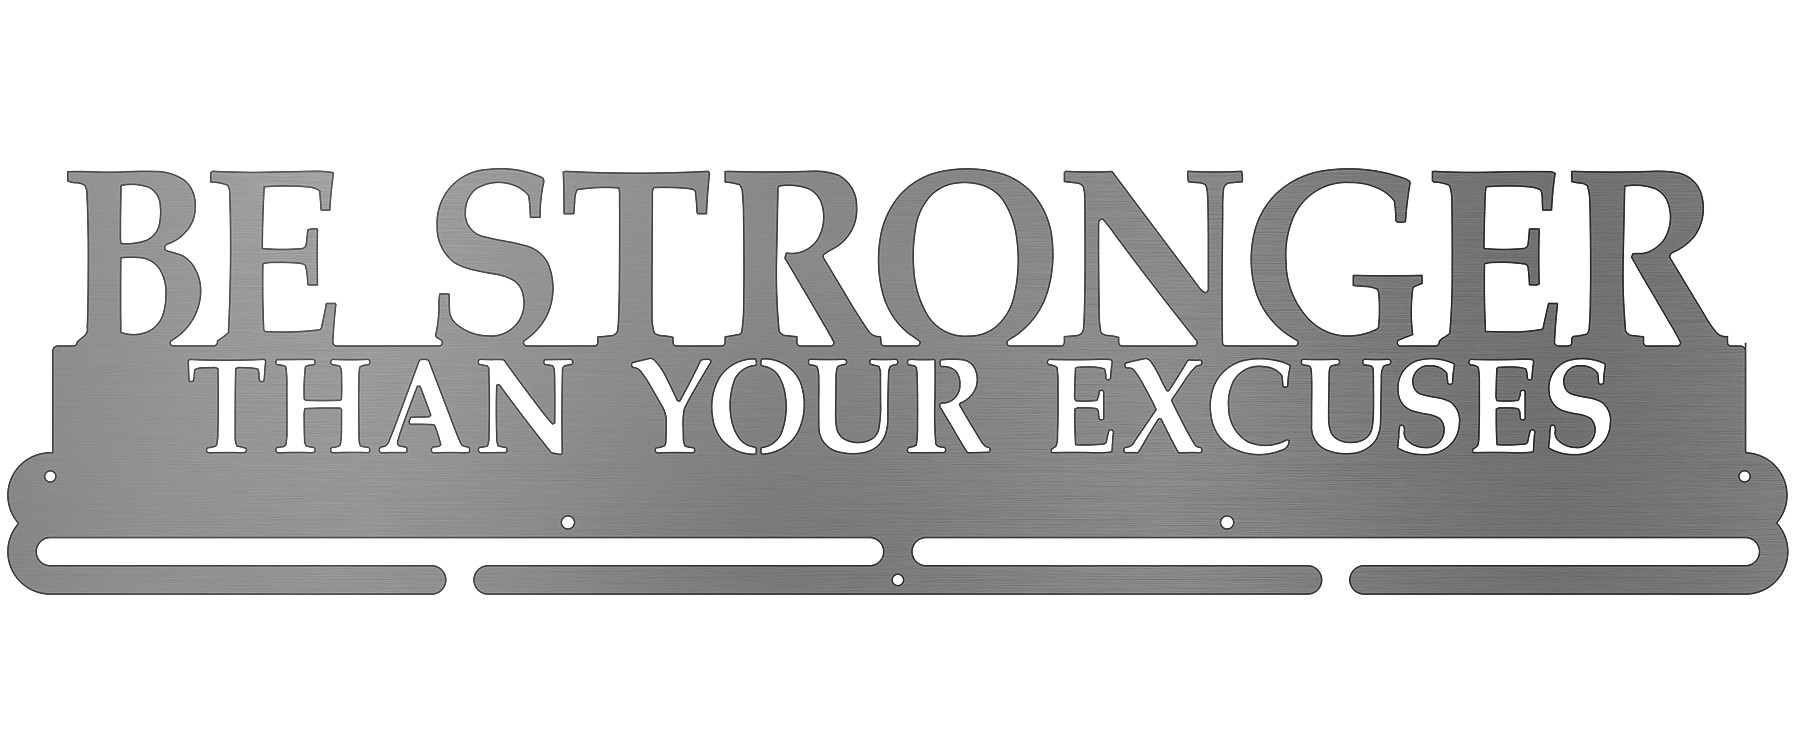 Be Stronger Than Your Excuses Bib and Medal Display